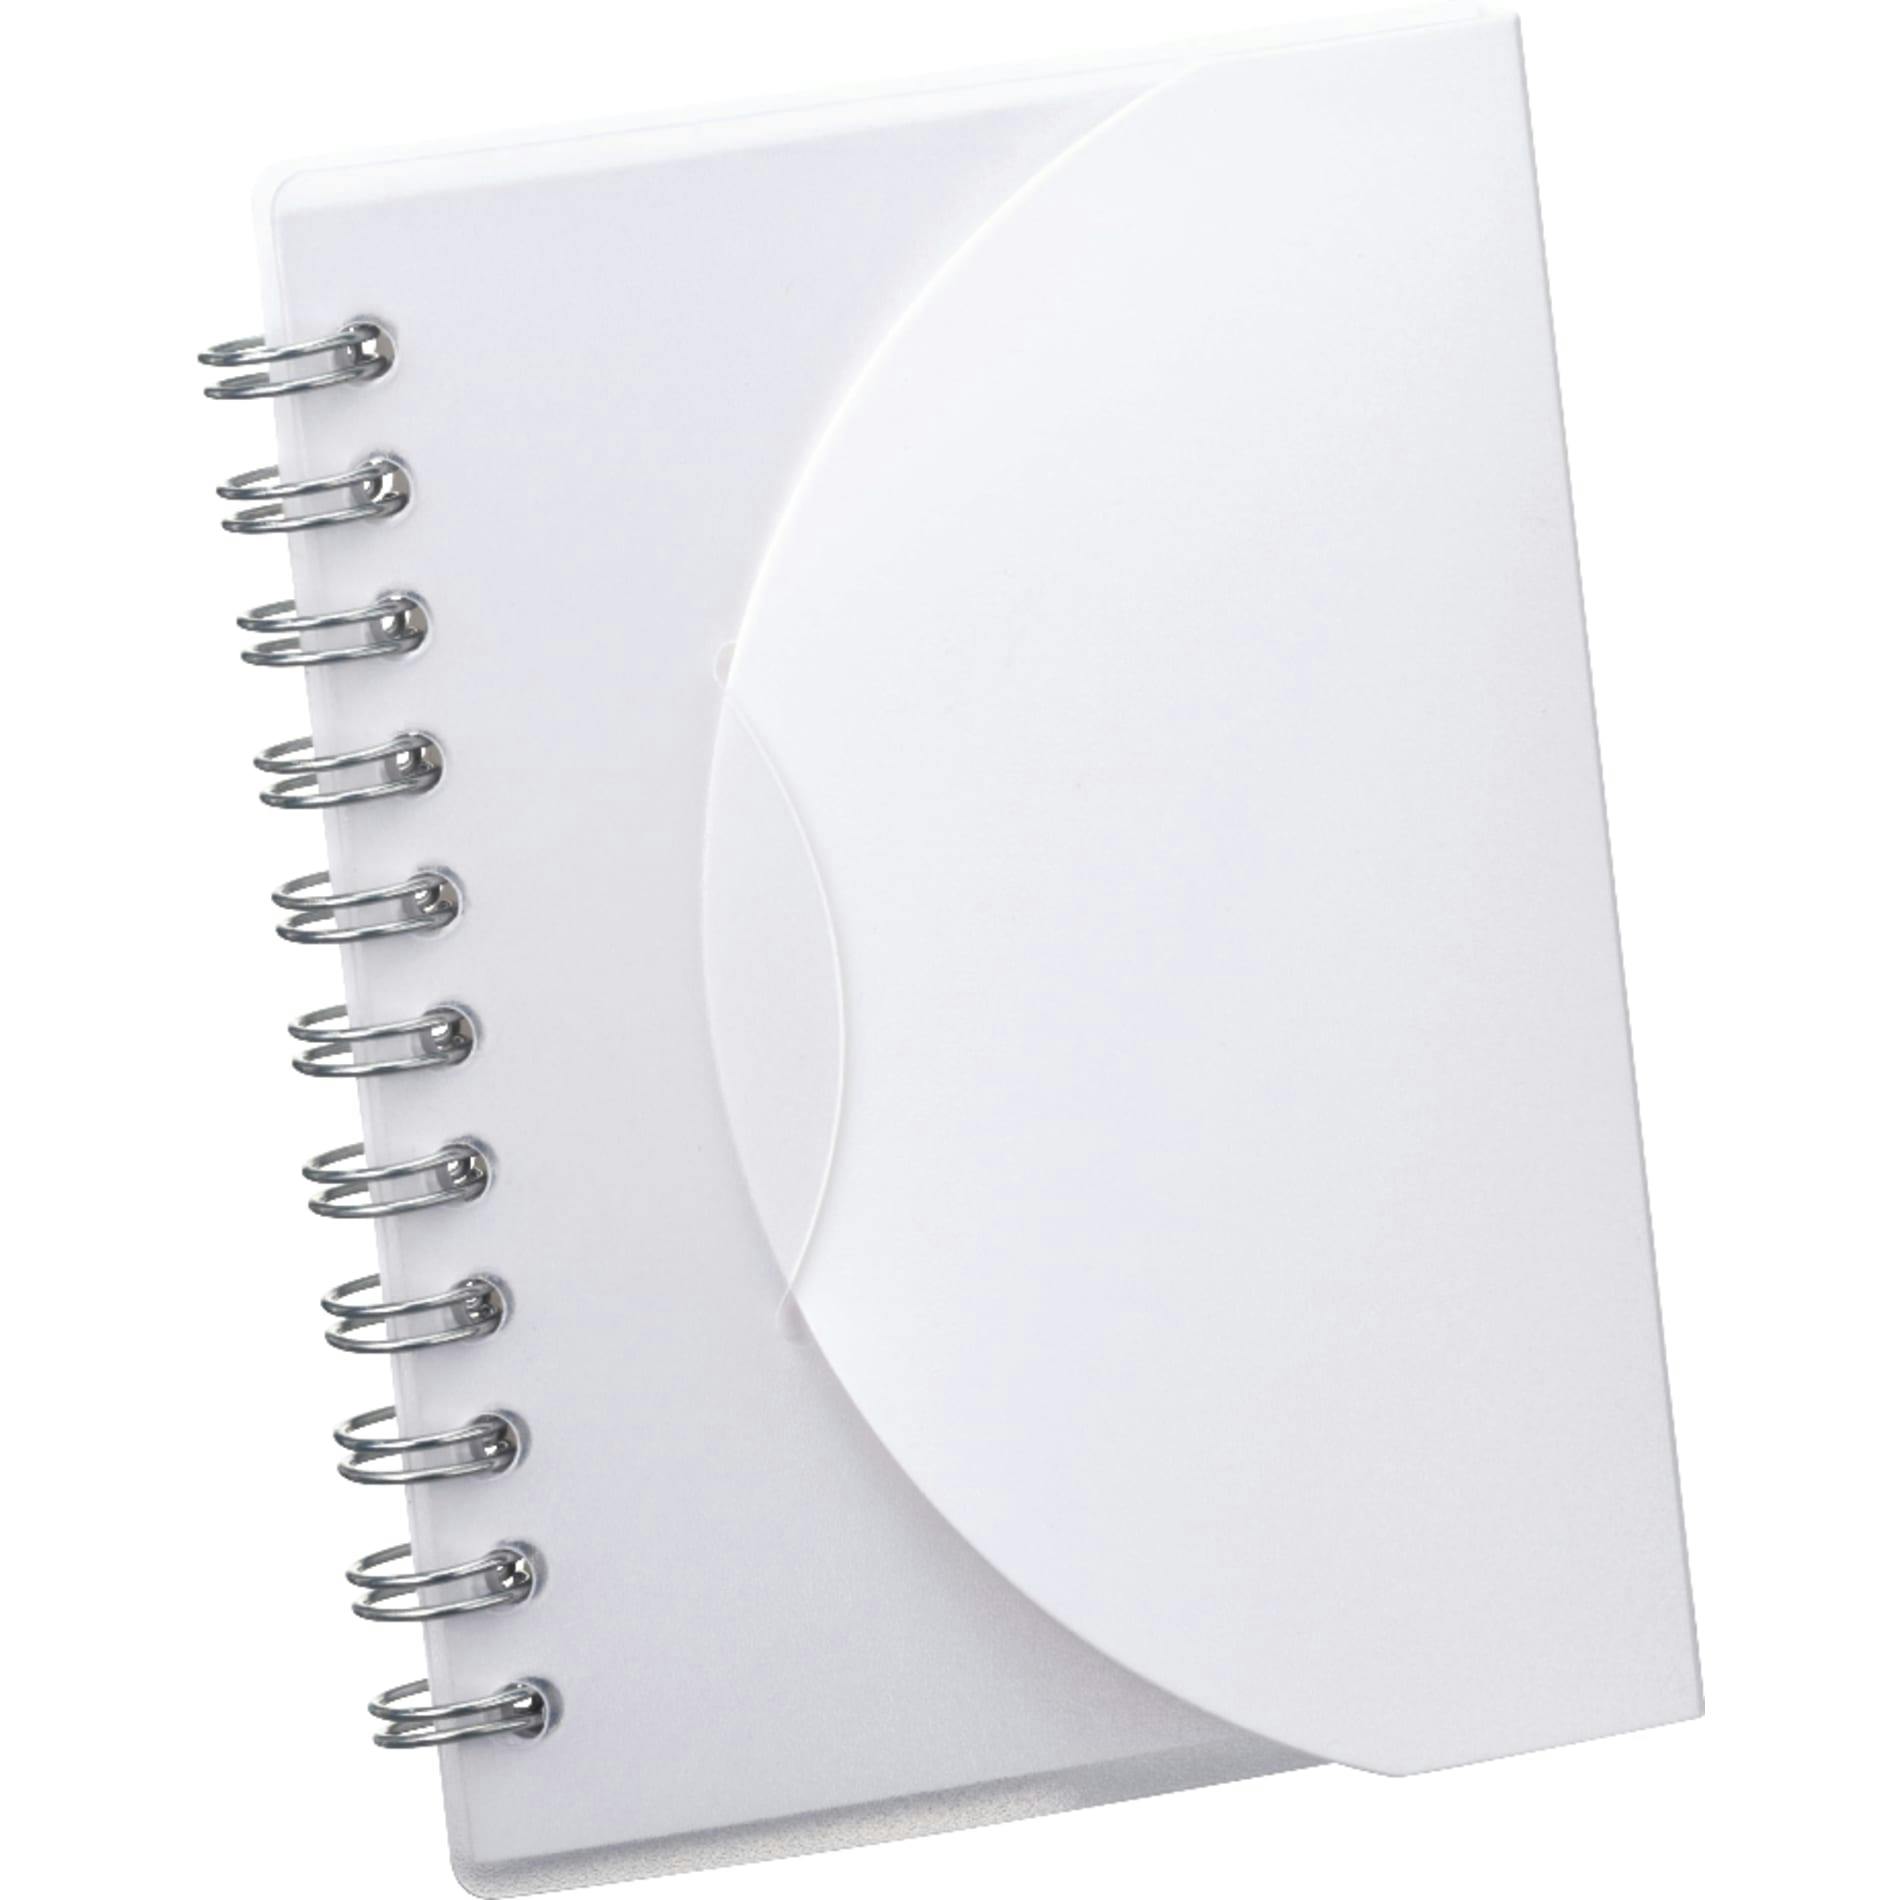 3" x 4.5" Post Spiral Notebook - additional Image 3